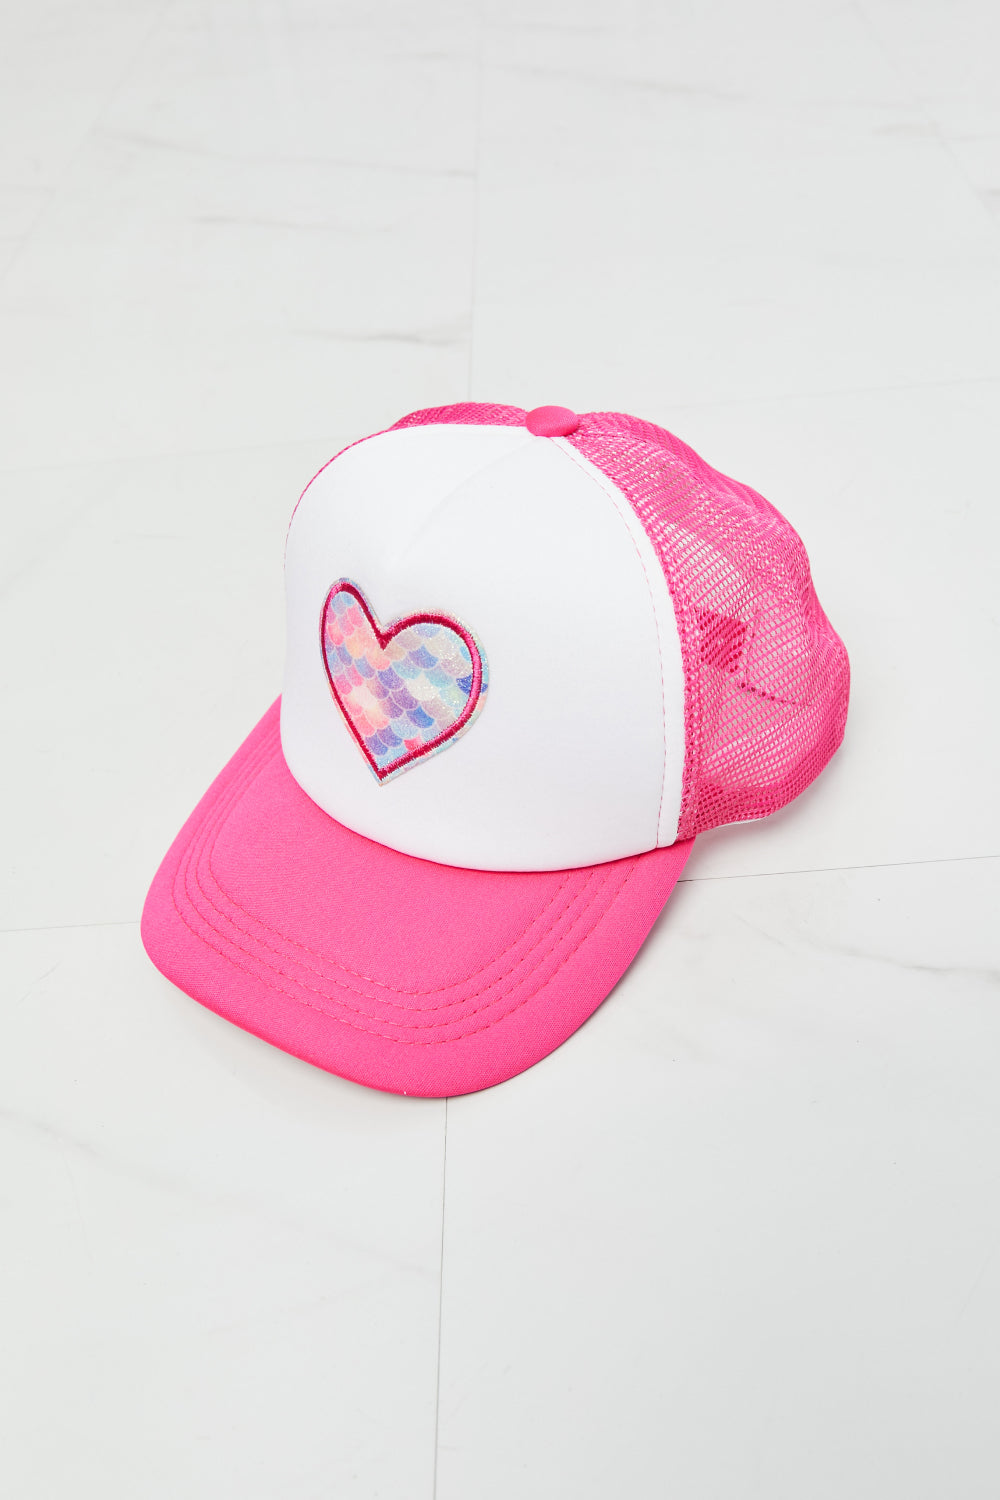 Fame Falling For You Trucker Hat in Pink free shipping -Oh Em Gee Boutique